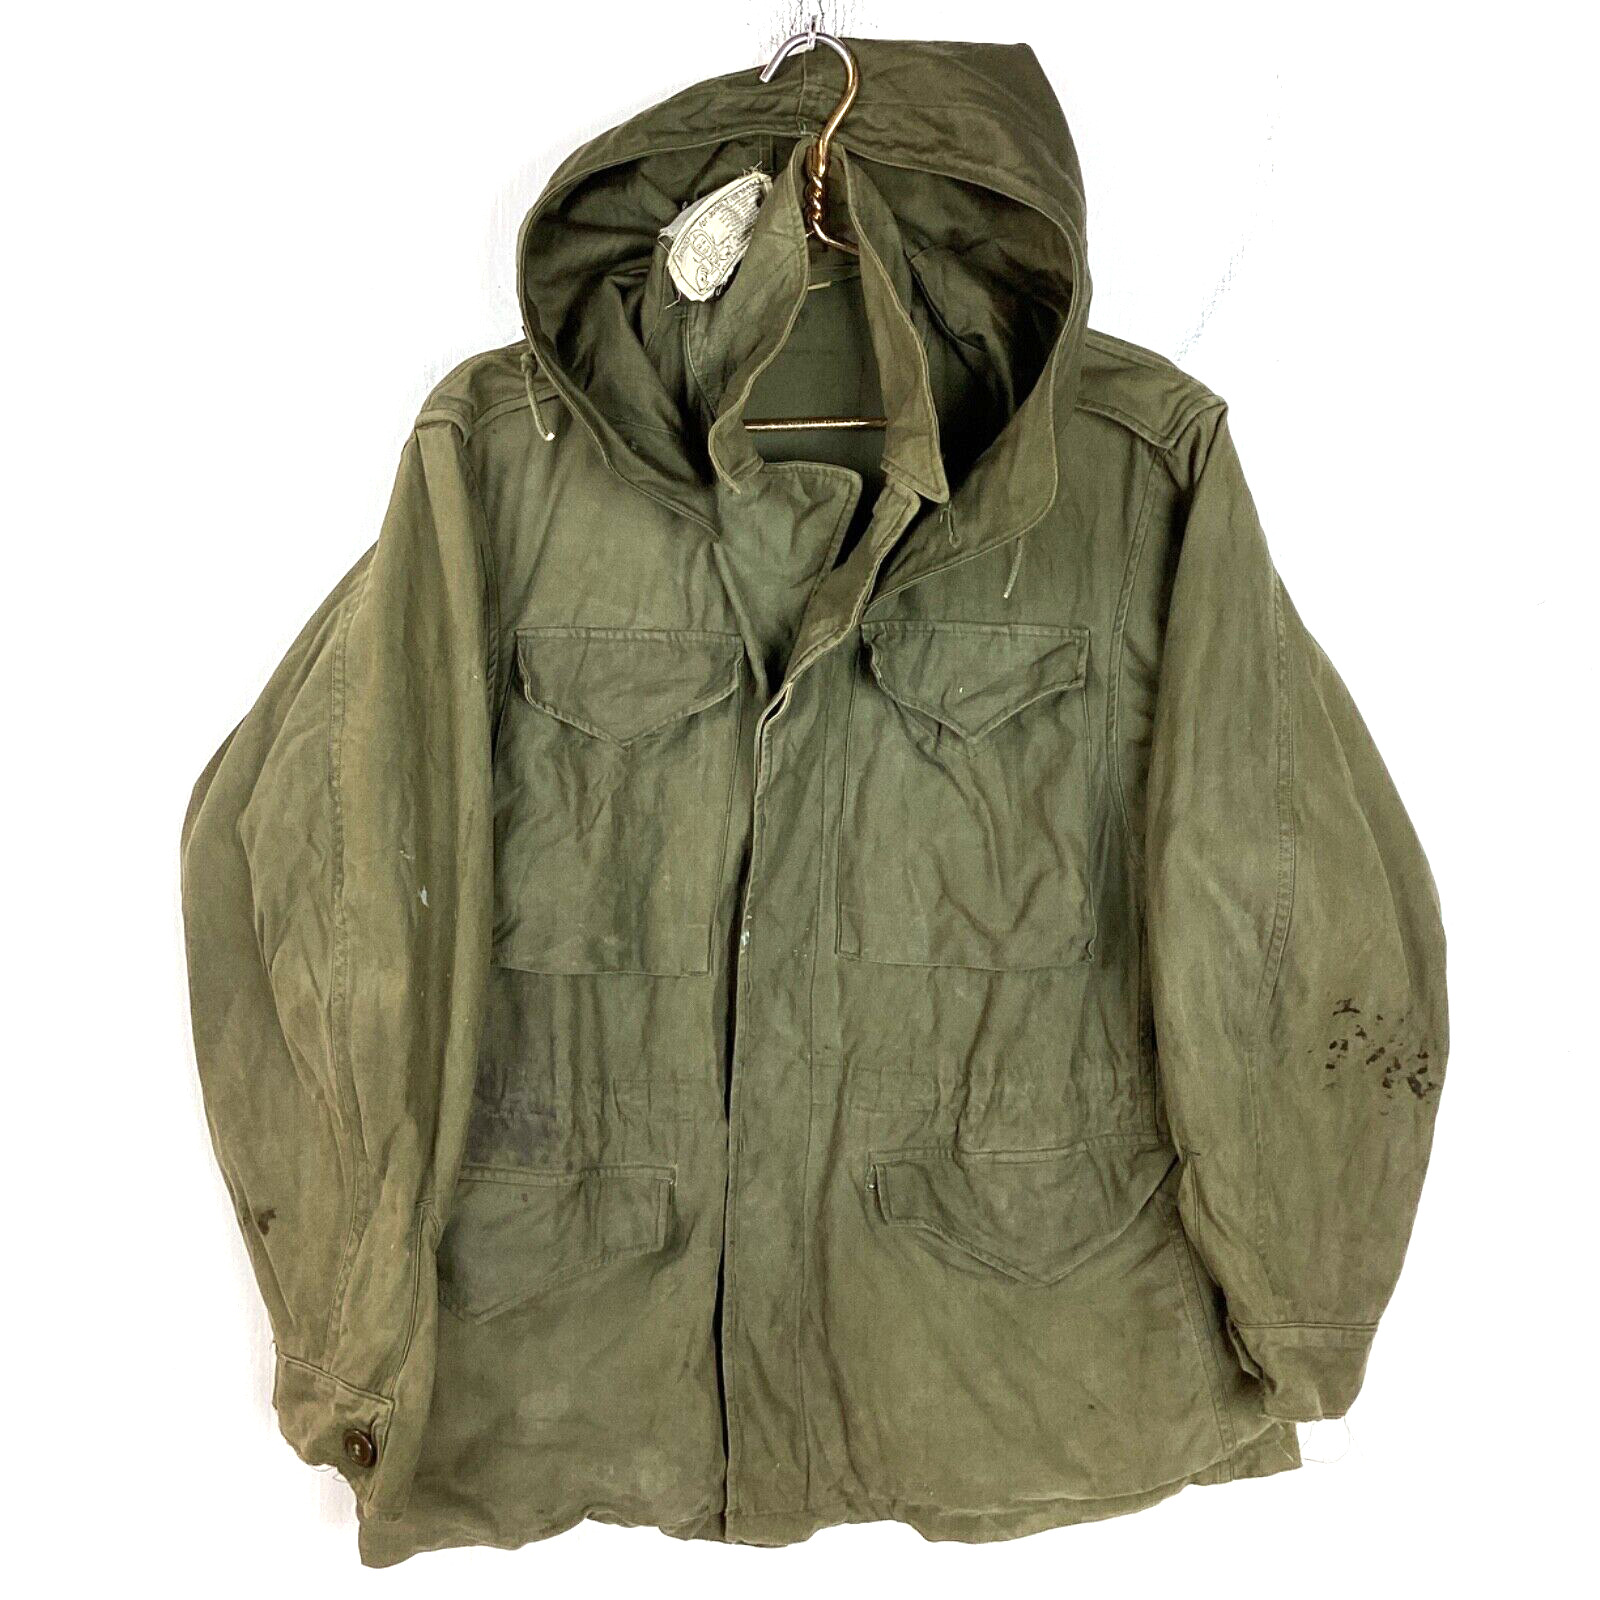 Vintage Us Military M-1943 Hooded Jacket Size 34 Green 40s